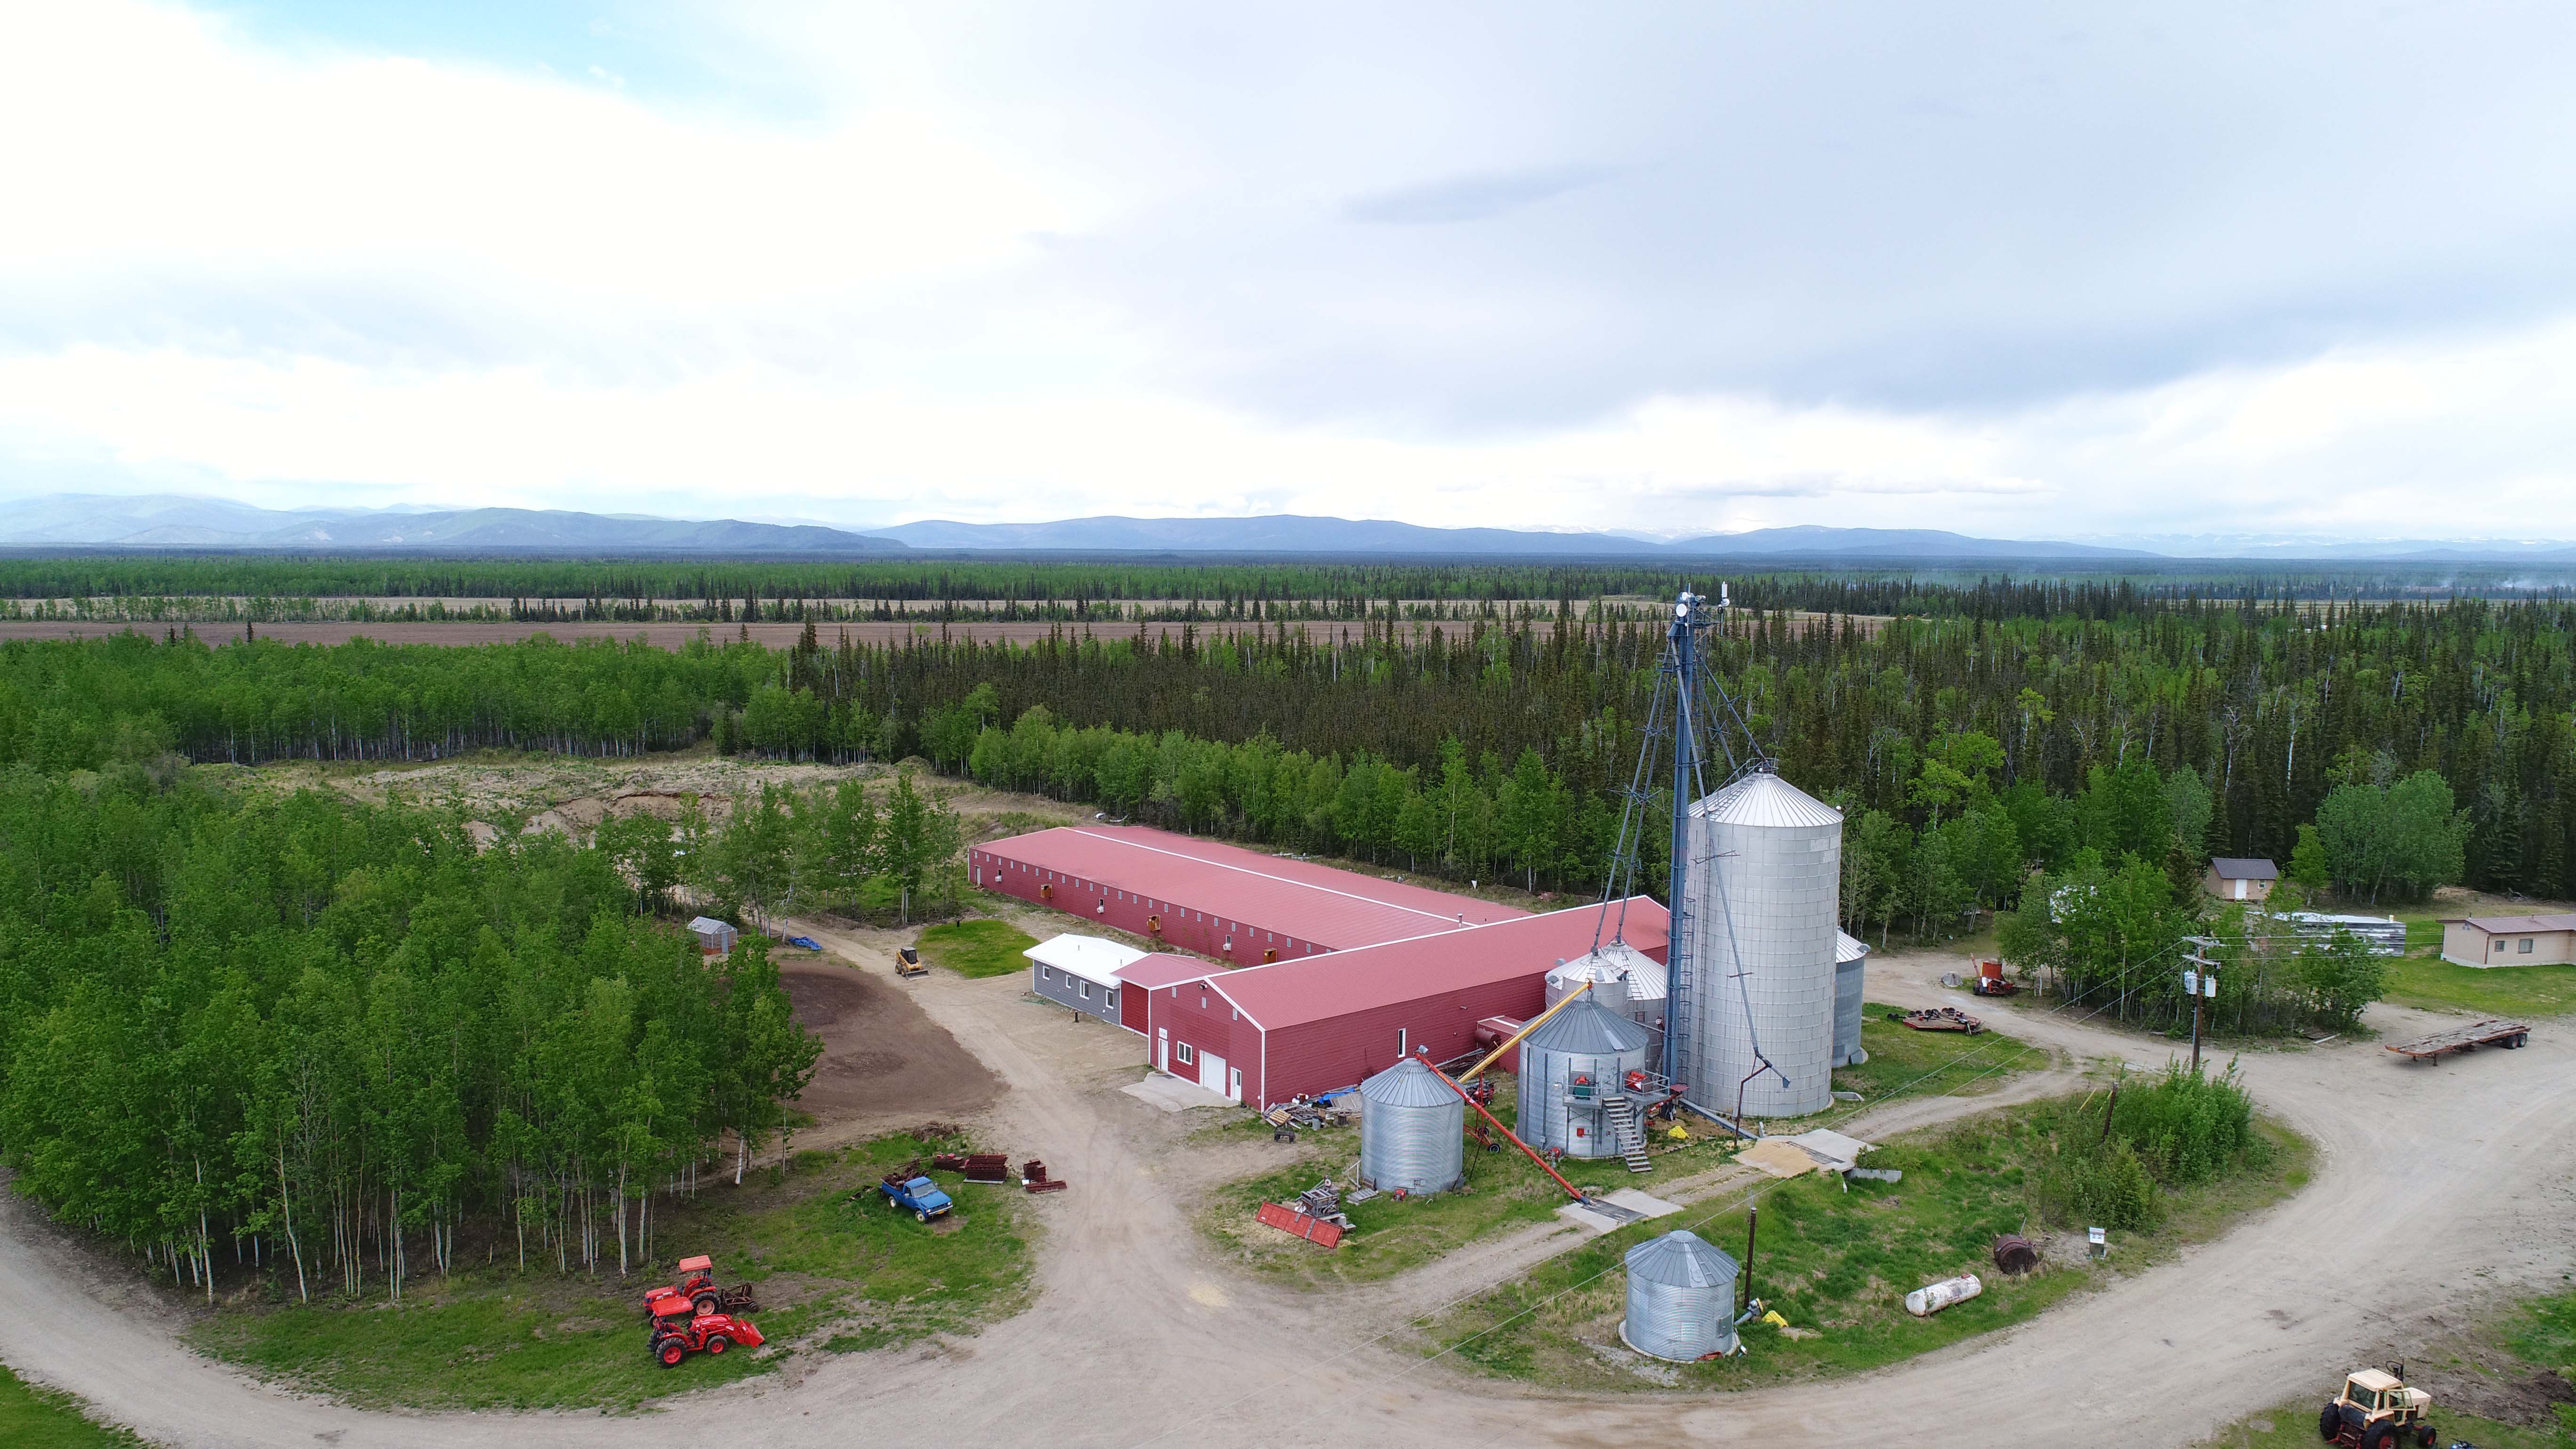 Filming Begins for a 30-Minute Documentary on Food Security in Alaska